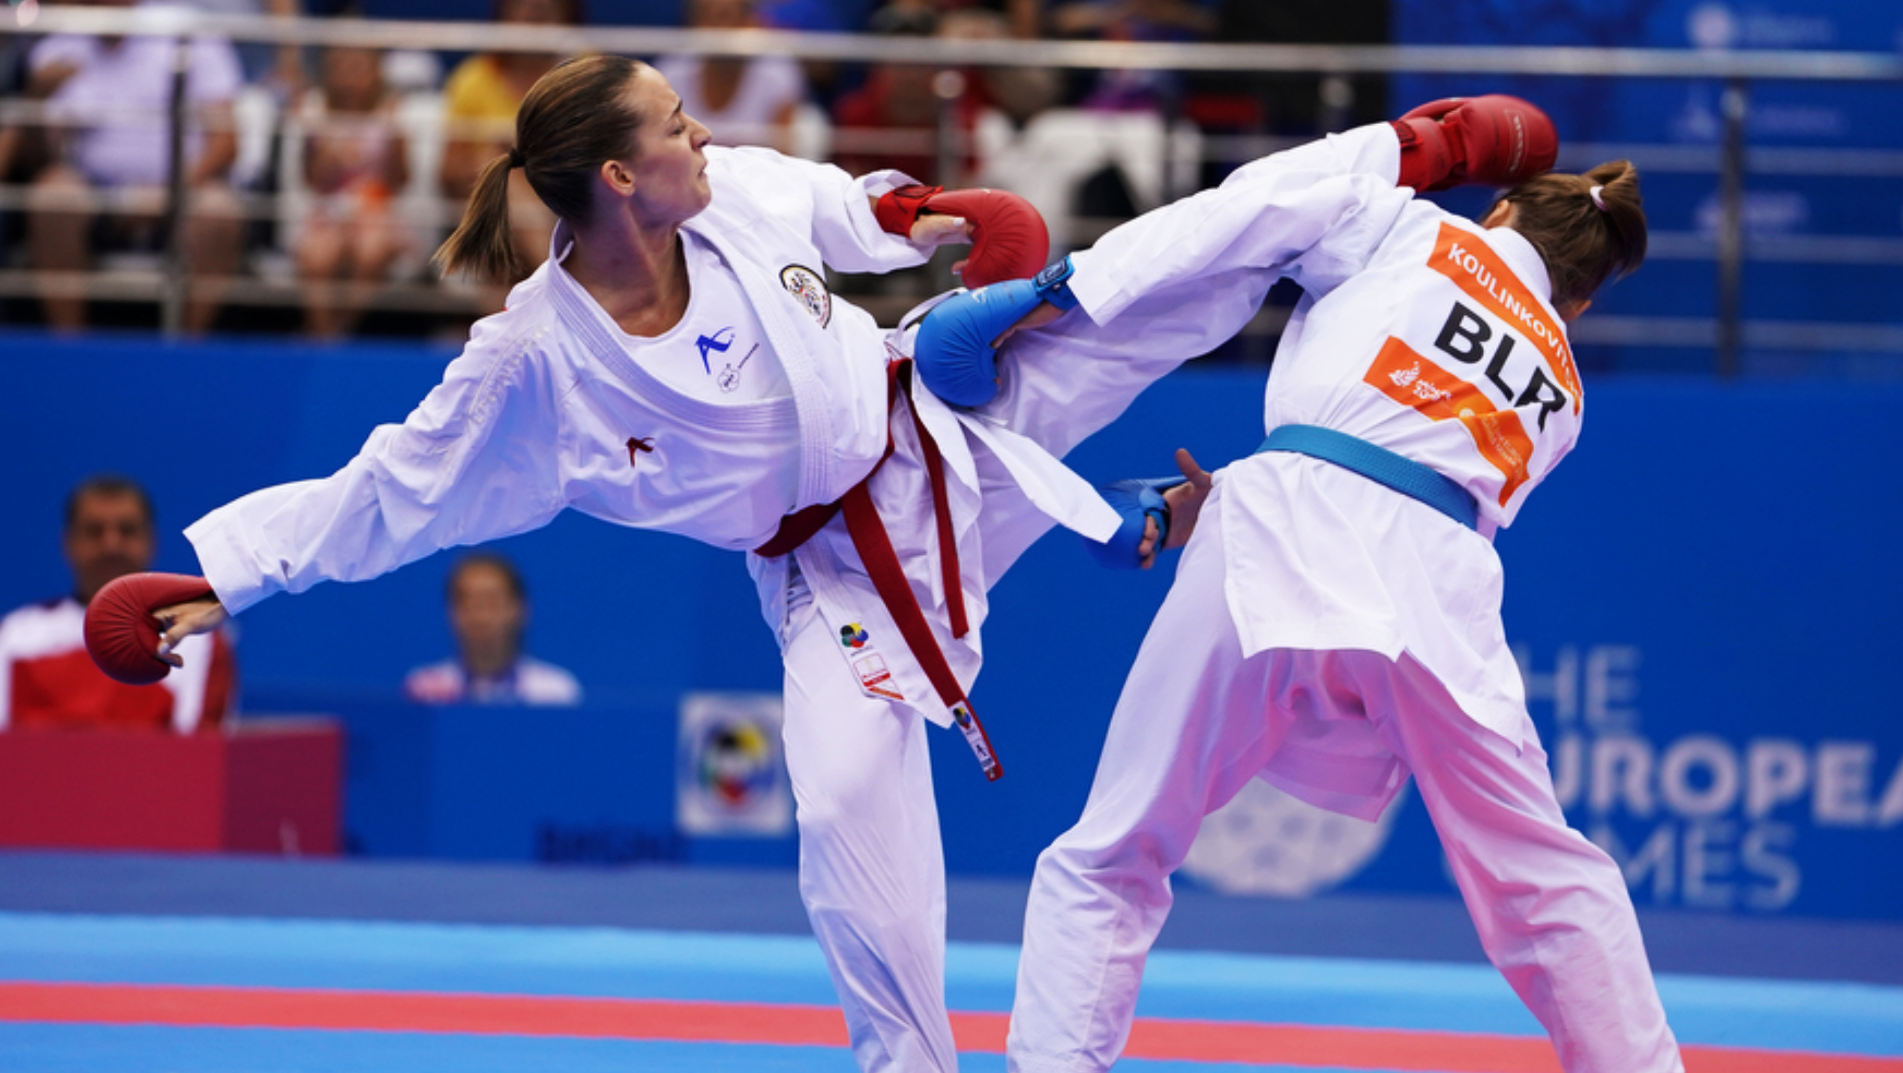 List of karate athletes set to feature at 2023 European Games confirmed 